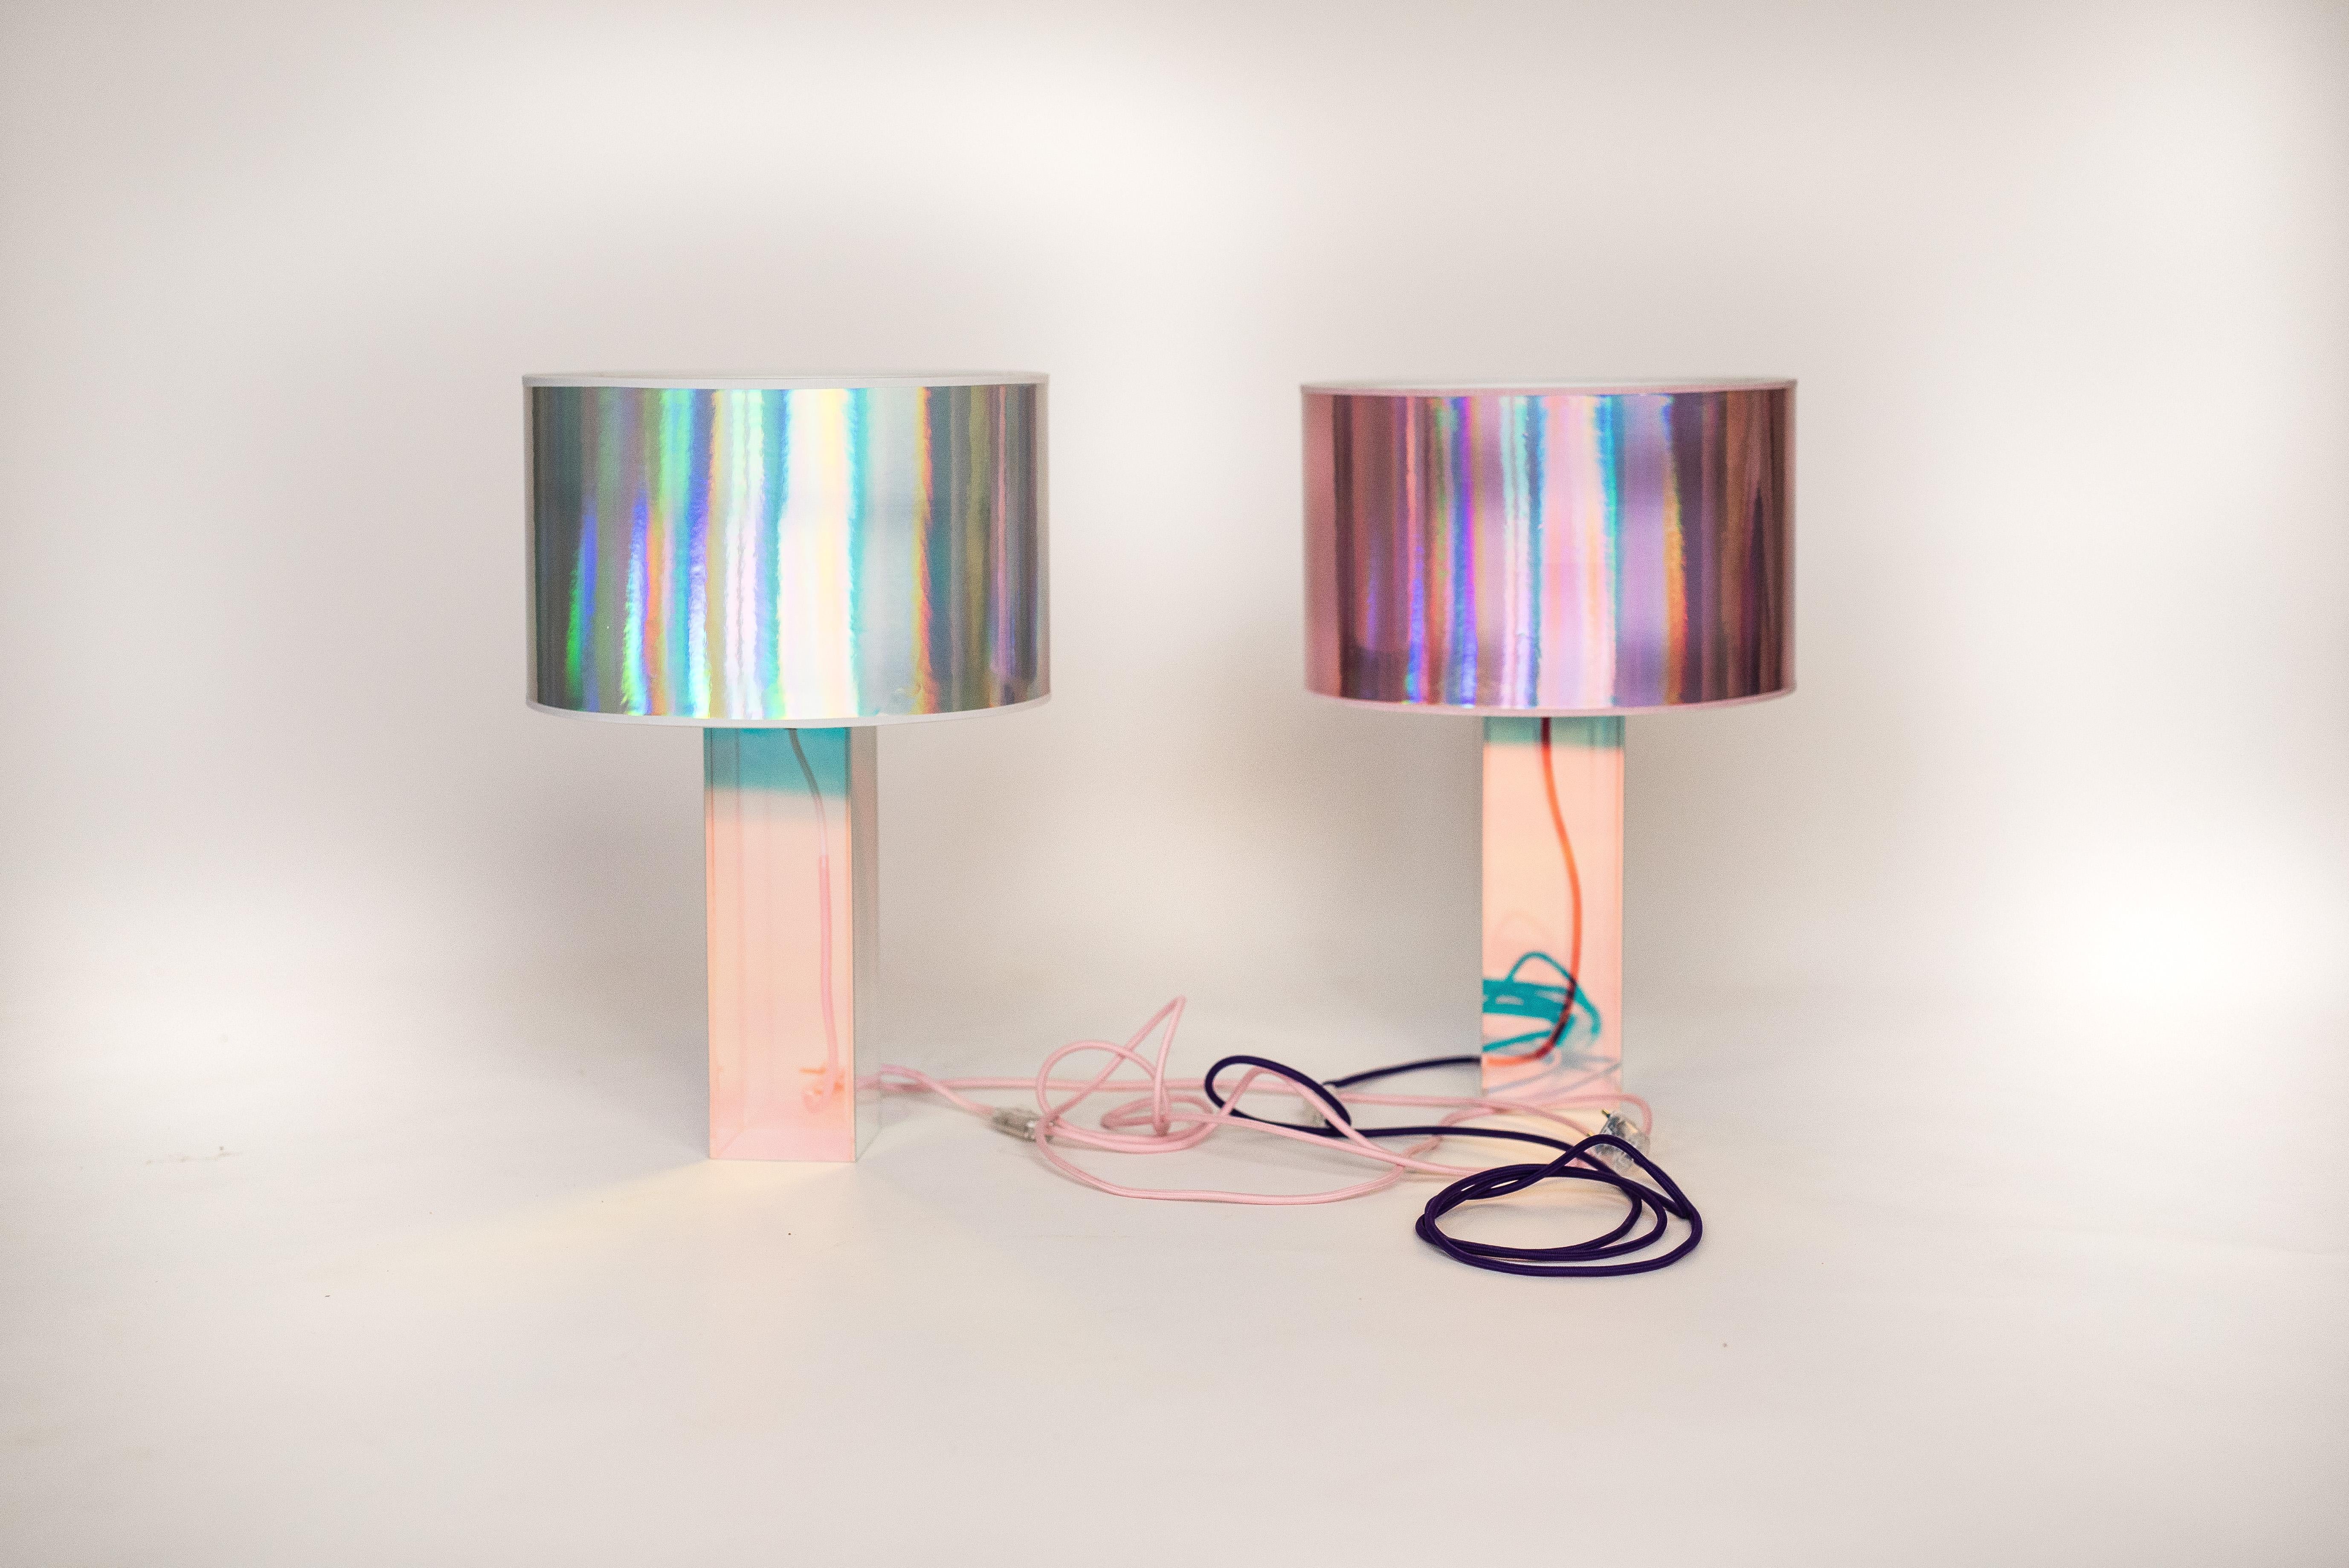 Kinetic colors table lamp by Brajak Vitberg
Materials: plexiglass, dichroic film
white or black cotton lampshade, cotton wiring
Dimensions: 52 x 35 x 35 cm

Bijelic and Brajak are two architects from Ljubljana, Slovenia.
They are striving to design